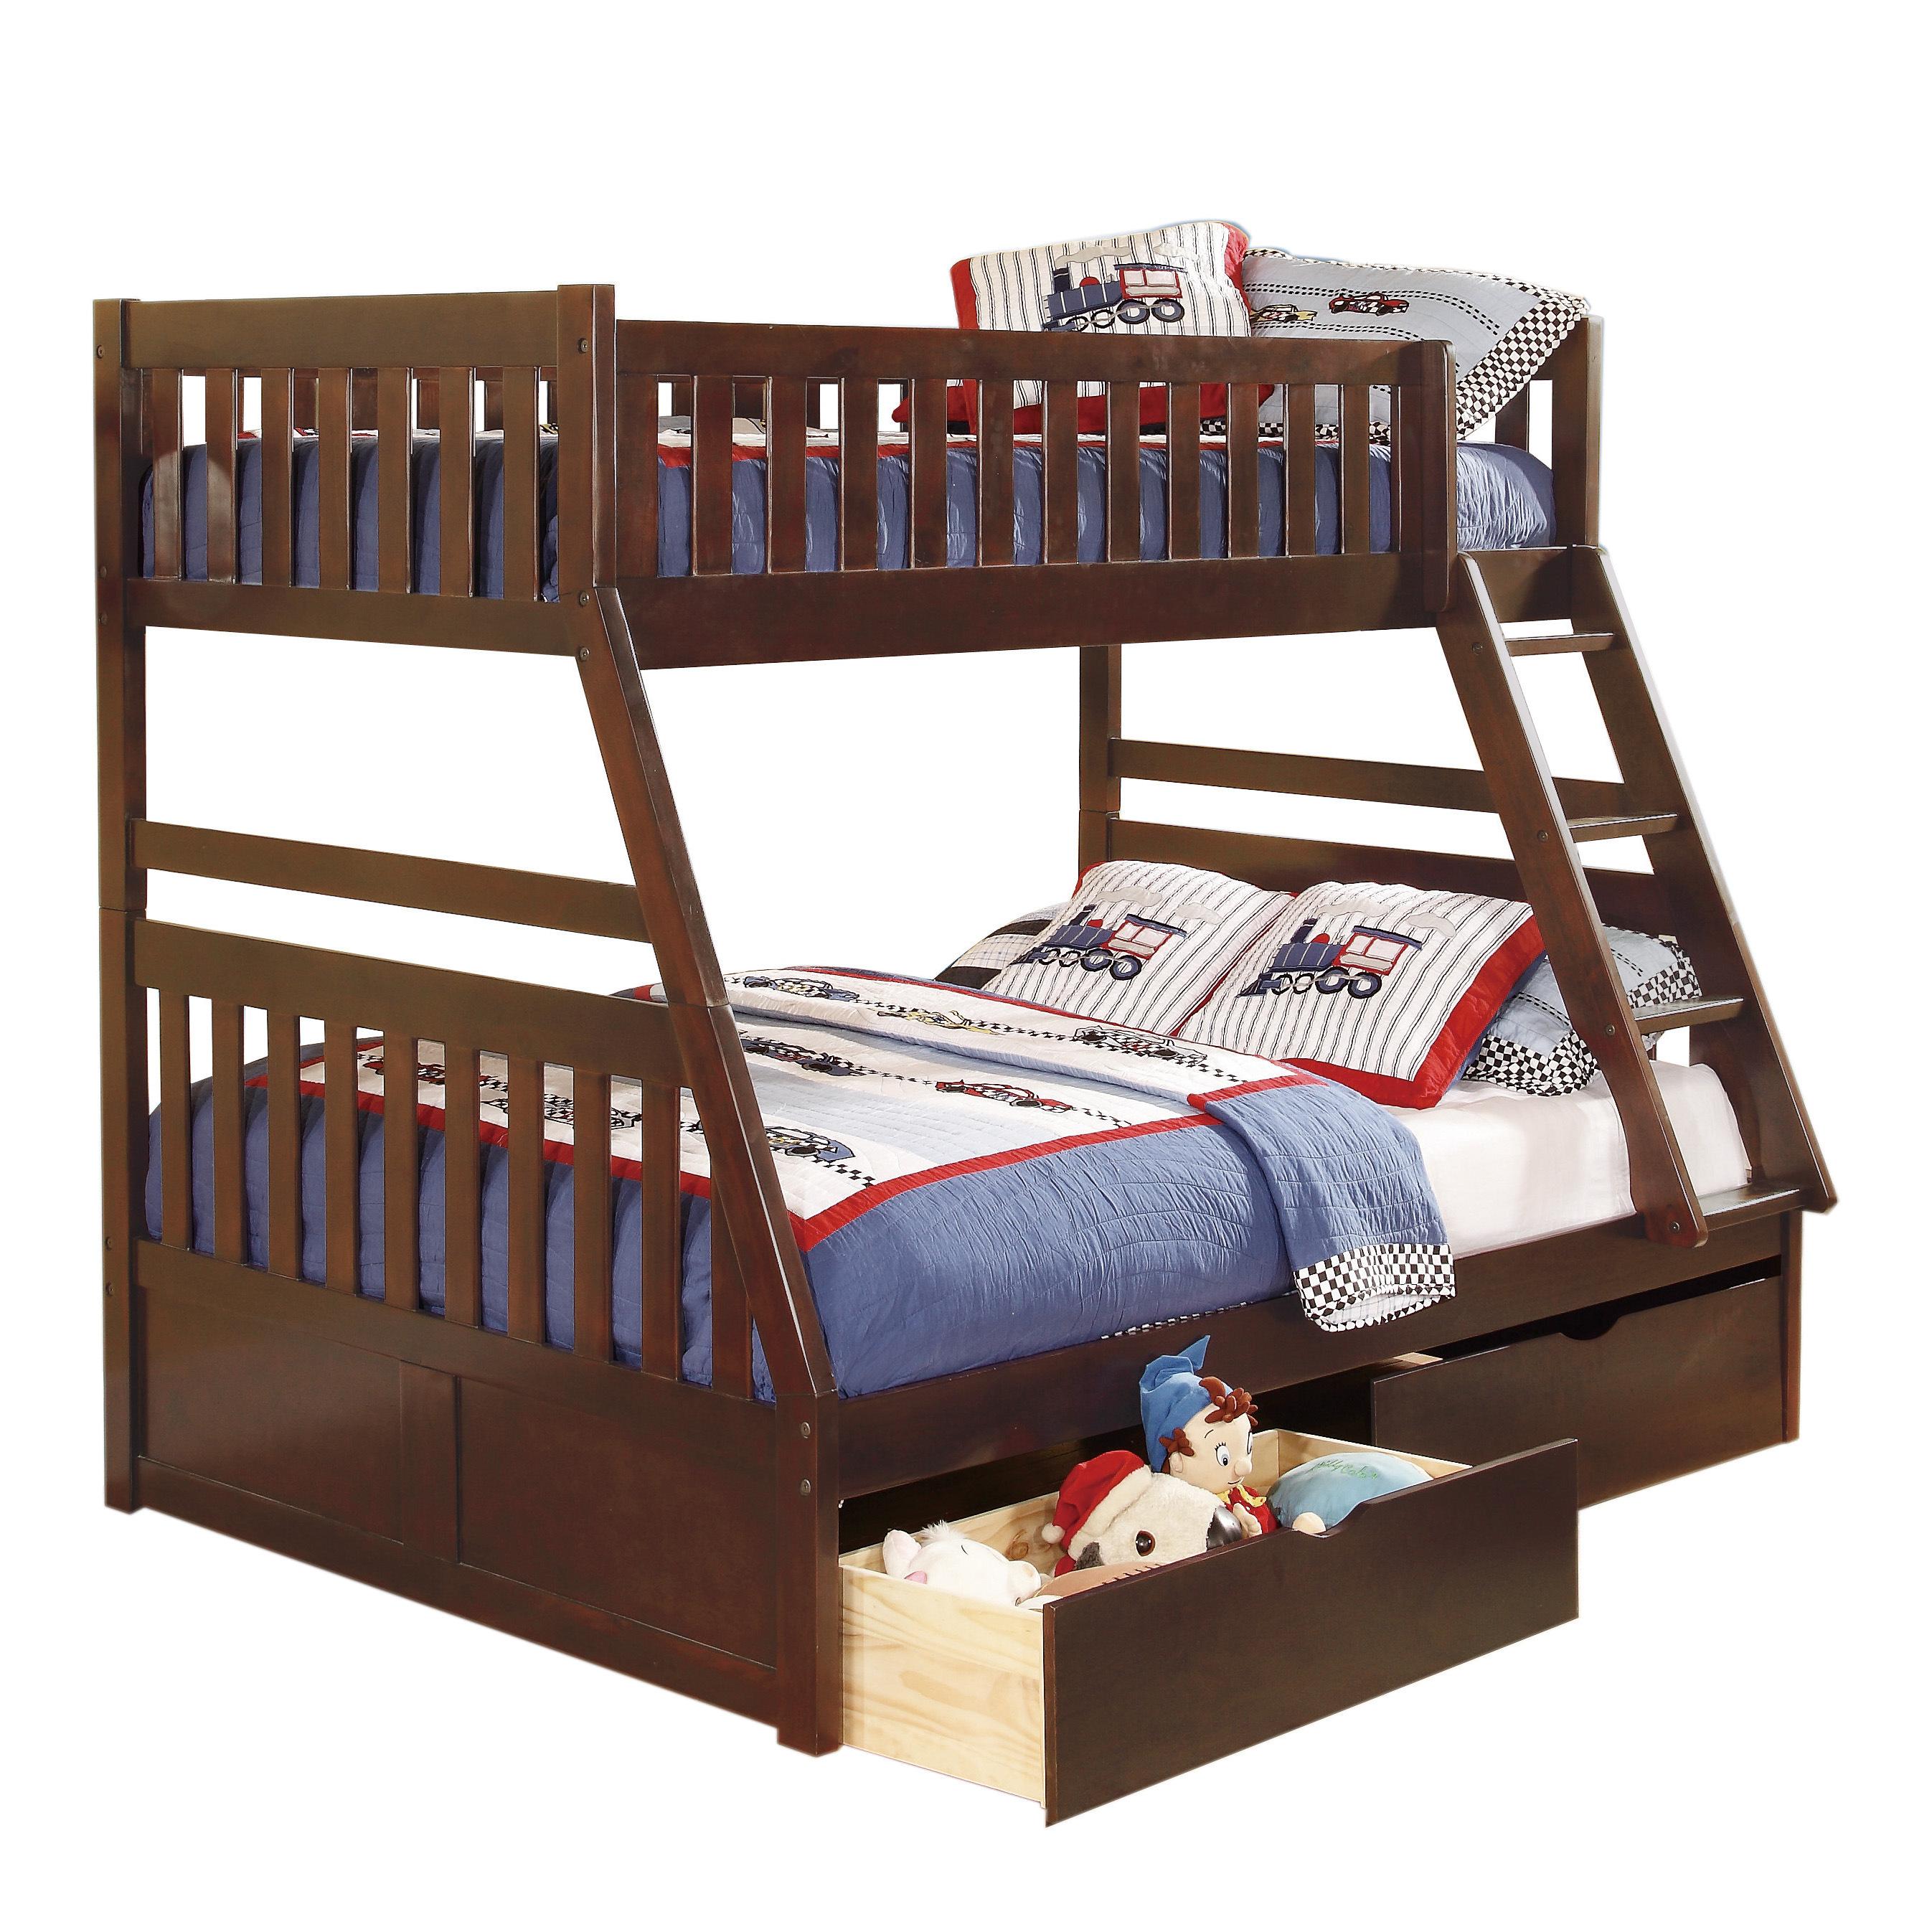 Transitional Twin/Full Bunk Bed B2013TFDC-1*T Rowe B2013TFDC-1*T in Dark Cherry 